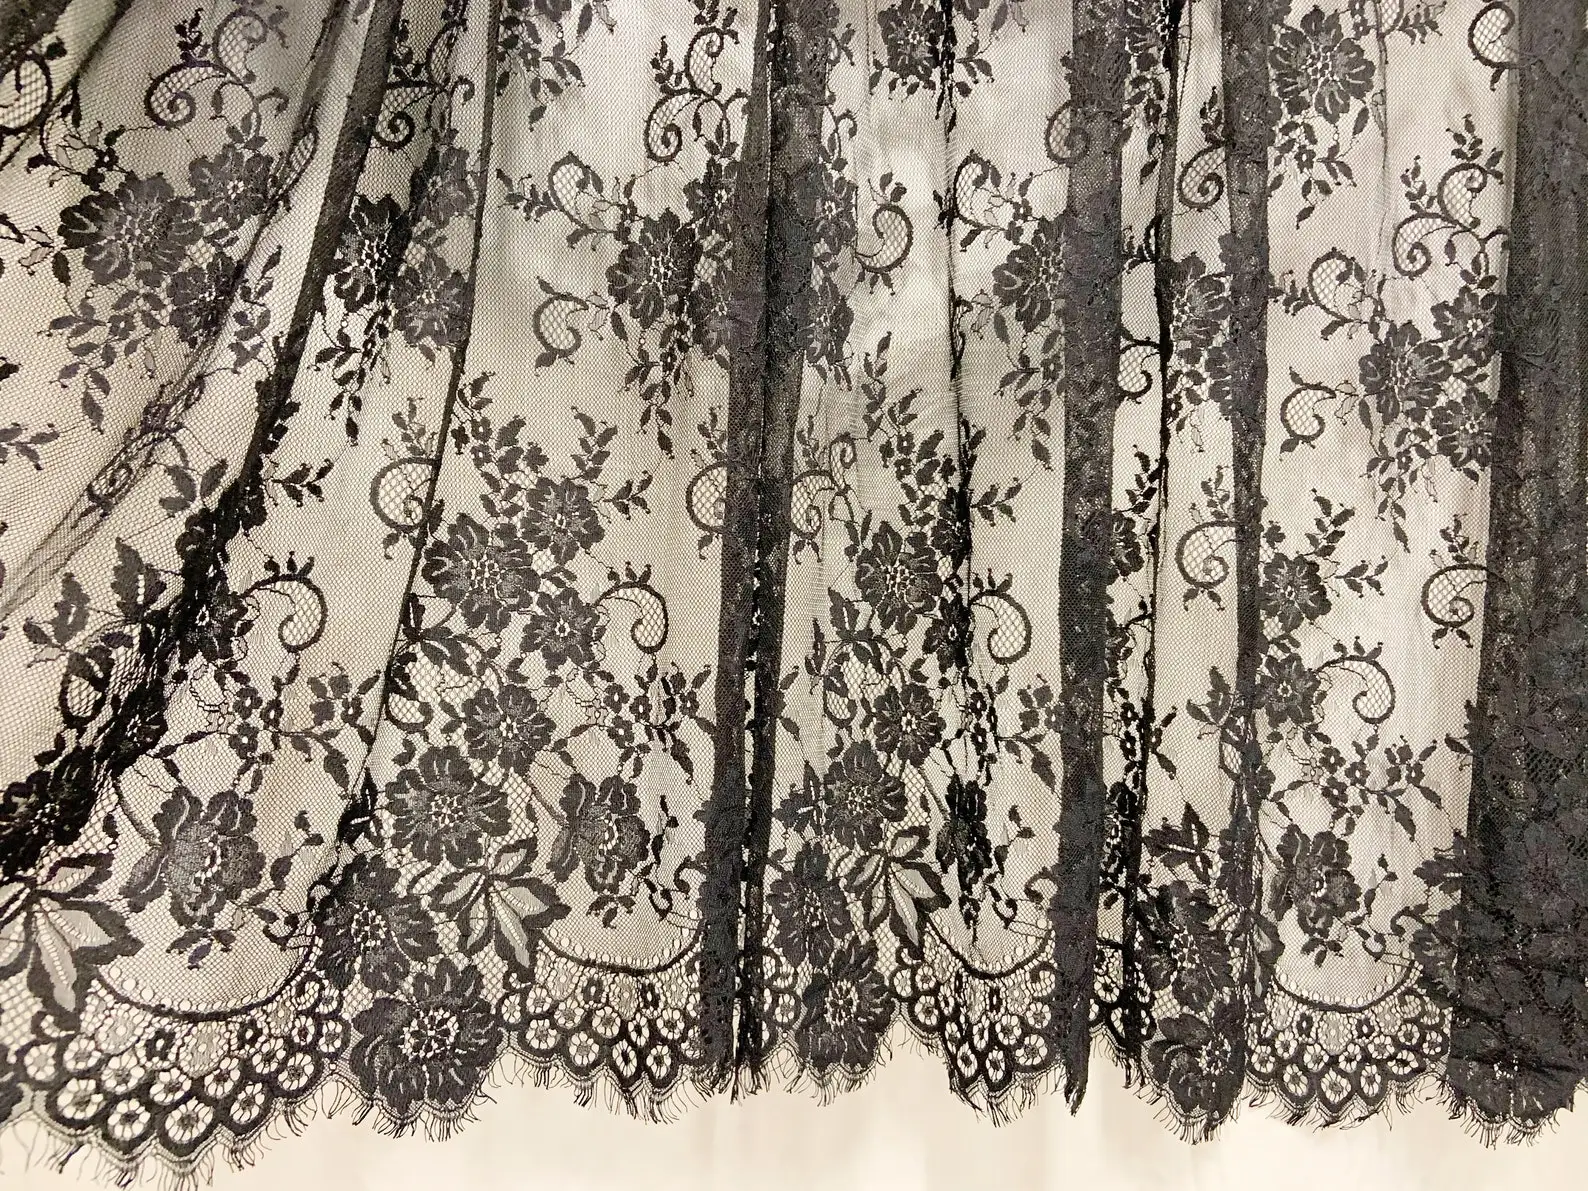 

3 yards Black Chantilly Lace Fabric with Double Selvedges Scalloped Lace Fabric with Florals for Wedding Dress Lingerie